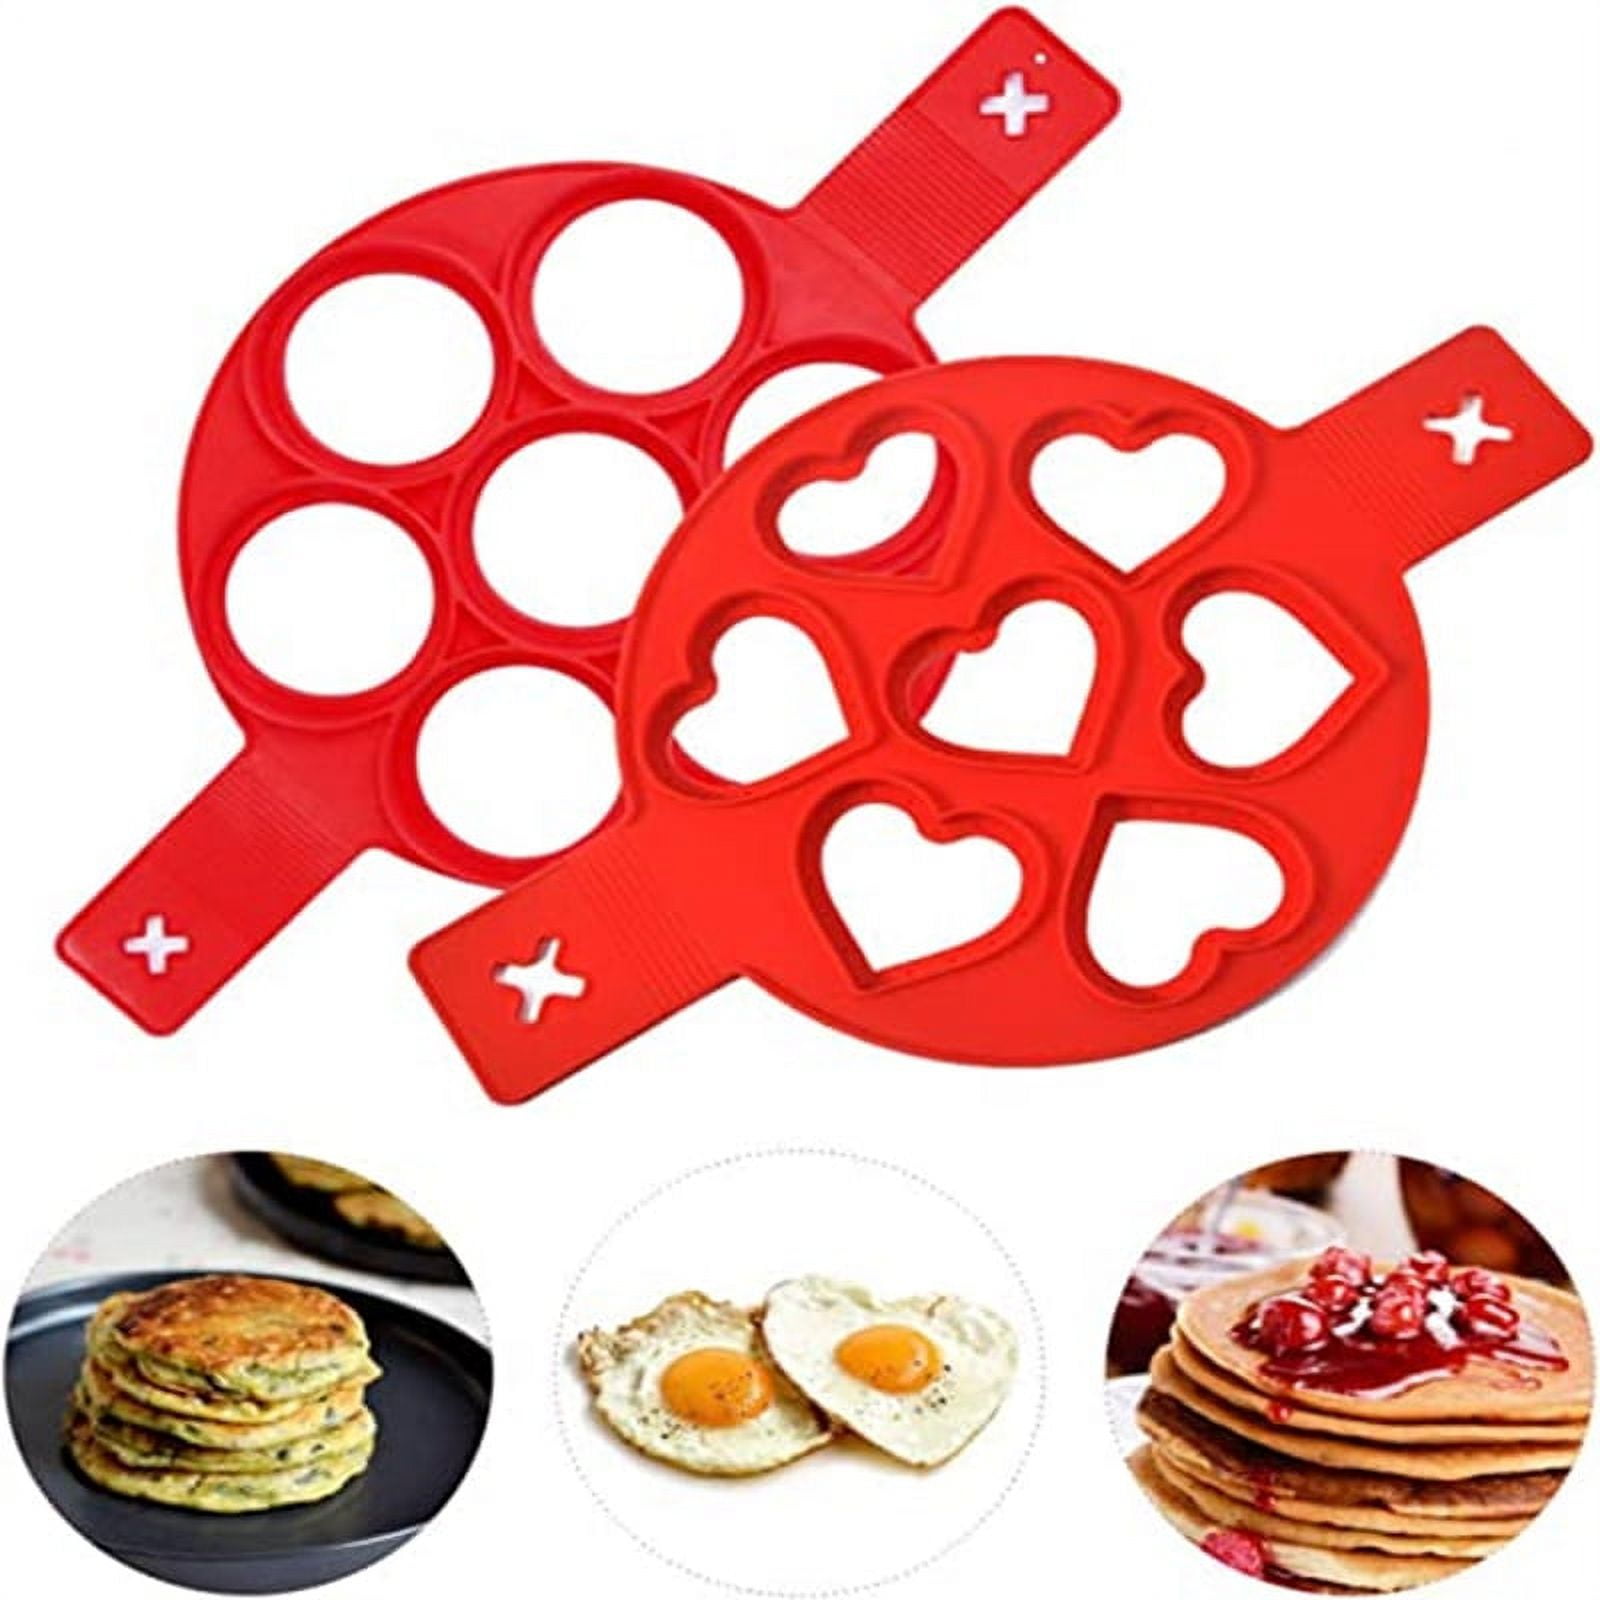 Dropship Silicone 7 Holes Fried Egg Mold Pancake Maker Mold Forms Non-Stick  Easy Omelette Mold Kitchen Accessories to Sell Online at a Lower Price